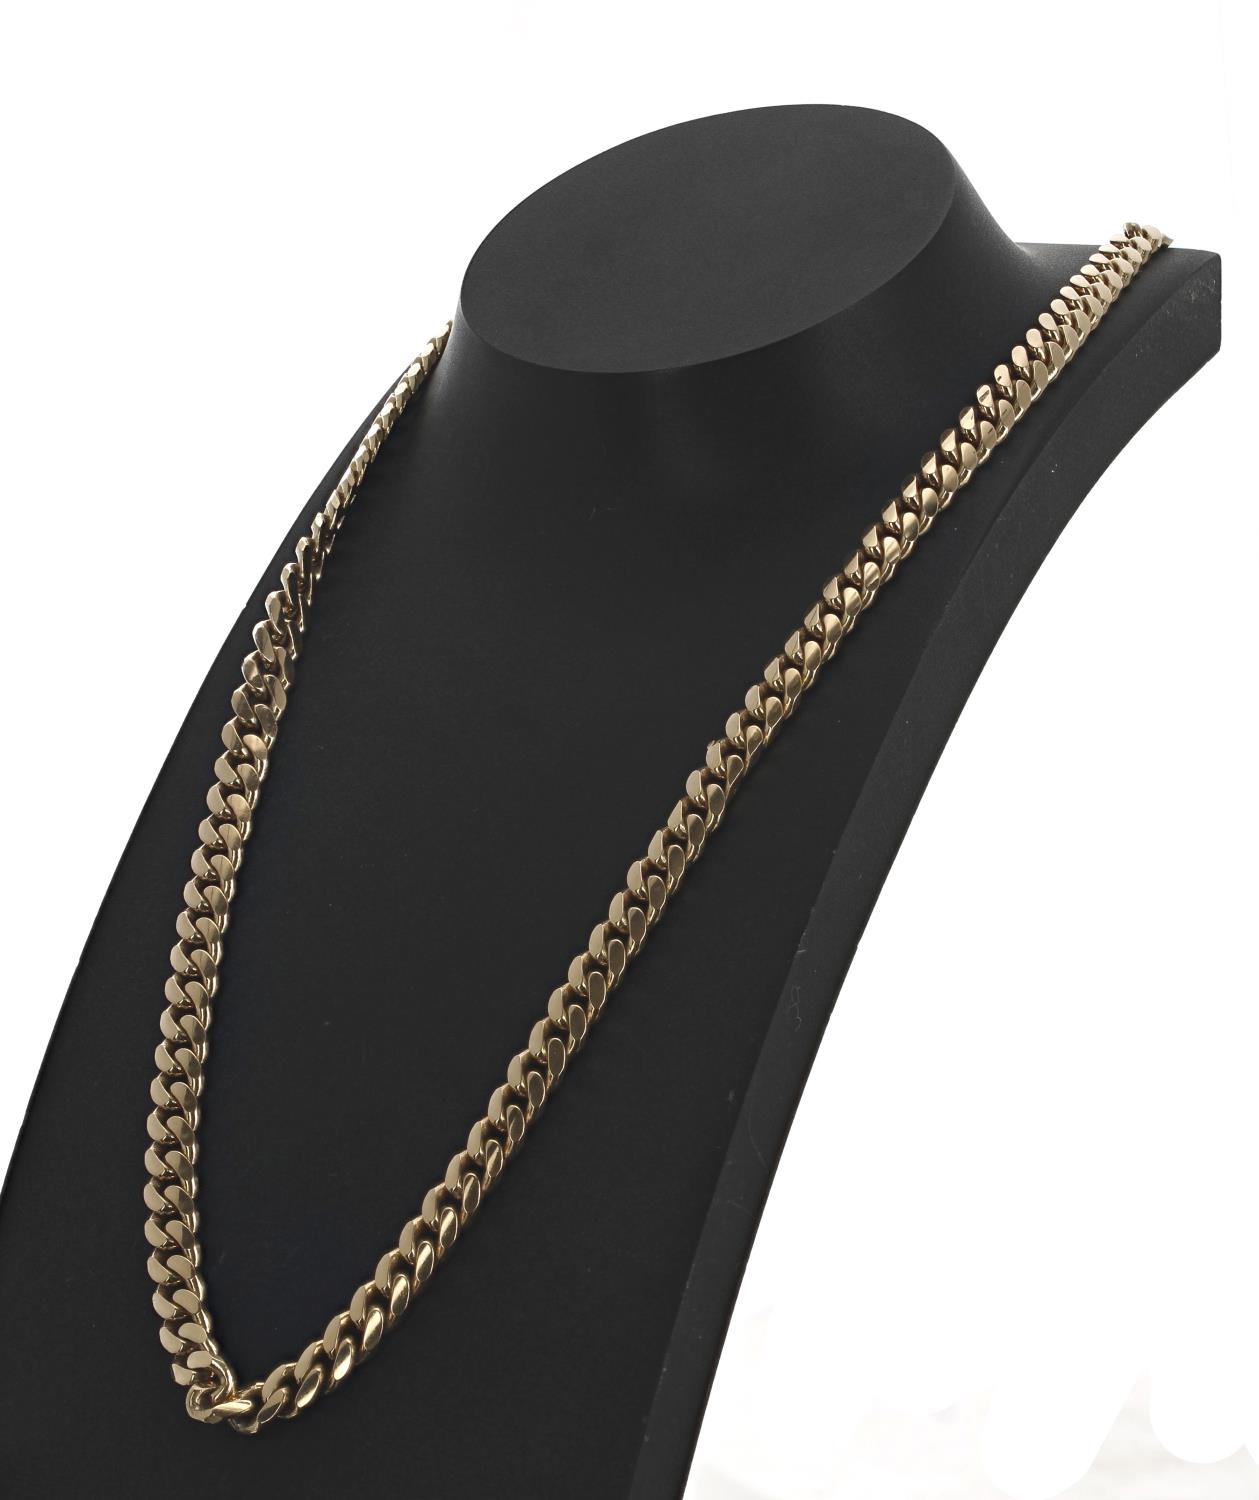 9ct curb necklace, 33.5gm, 20" long (214)